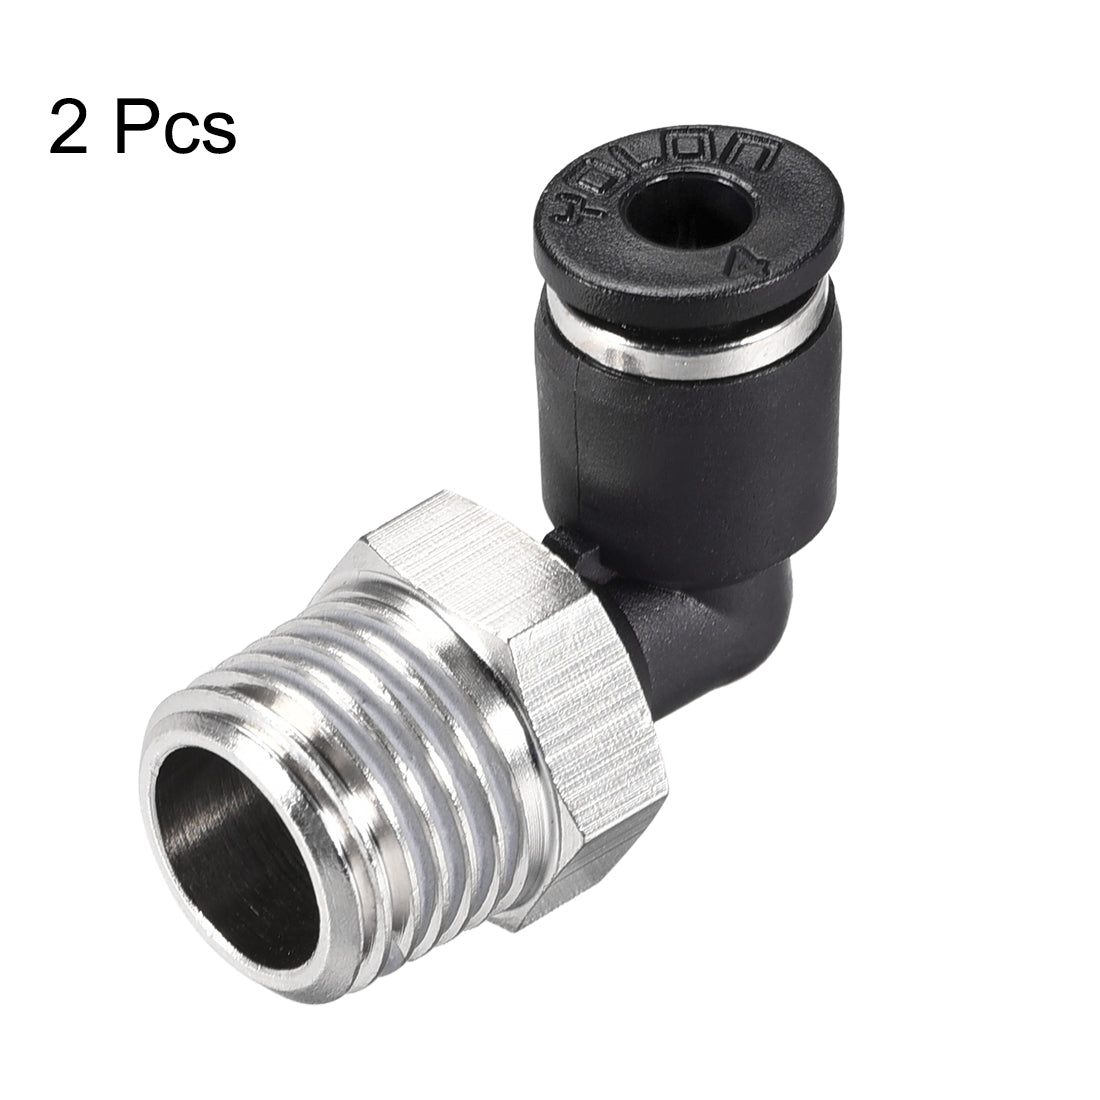 uxcell Uxcell Push to Connect Tube Fitting Male Elbow 4mm Tube OD x 1/4 NPT Thread Pneumatic Air Push Fit Lock Fitting 2pcs